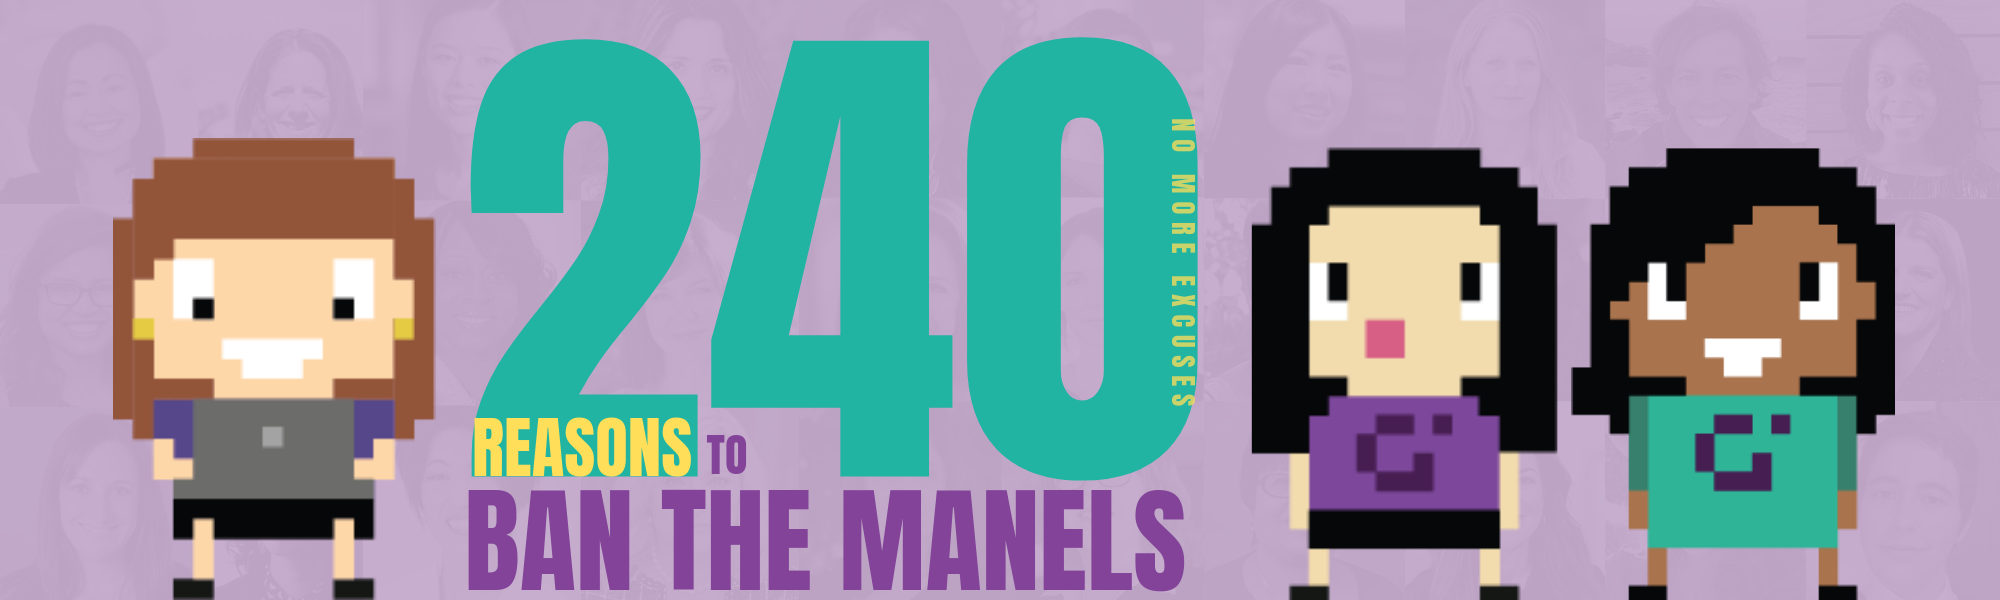 240 women who can speak at your event ban the manels